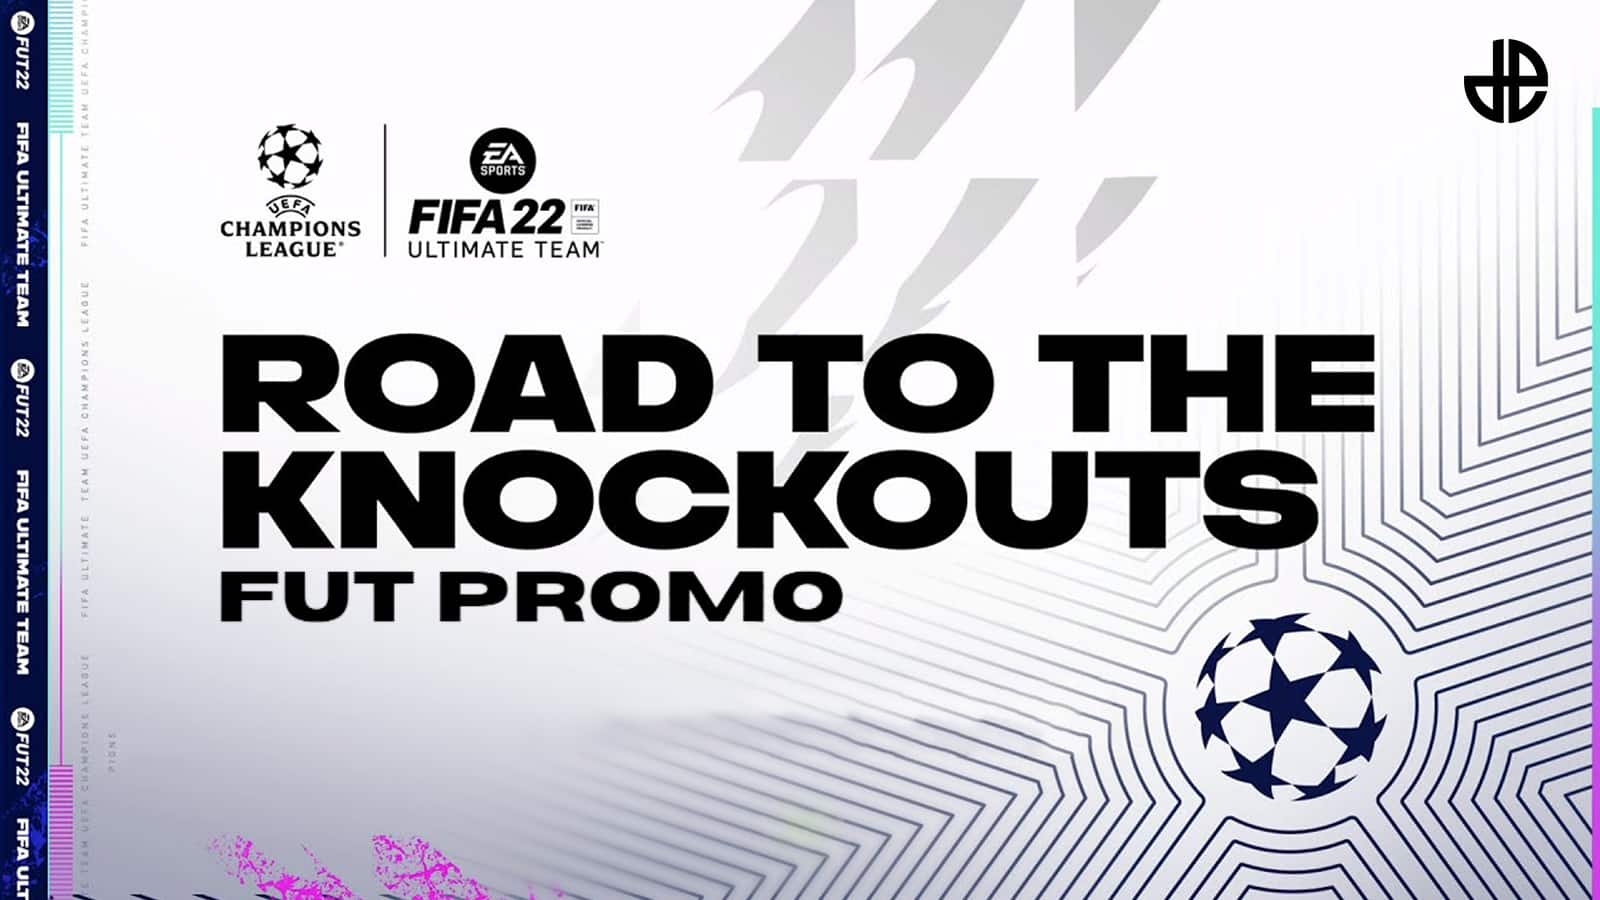 FIFA 23: Road To The Knockouts Promo Live